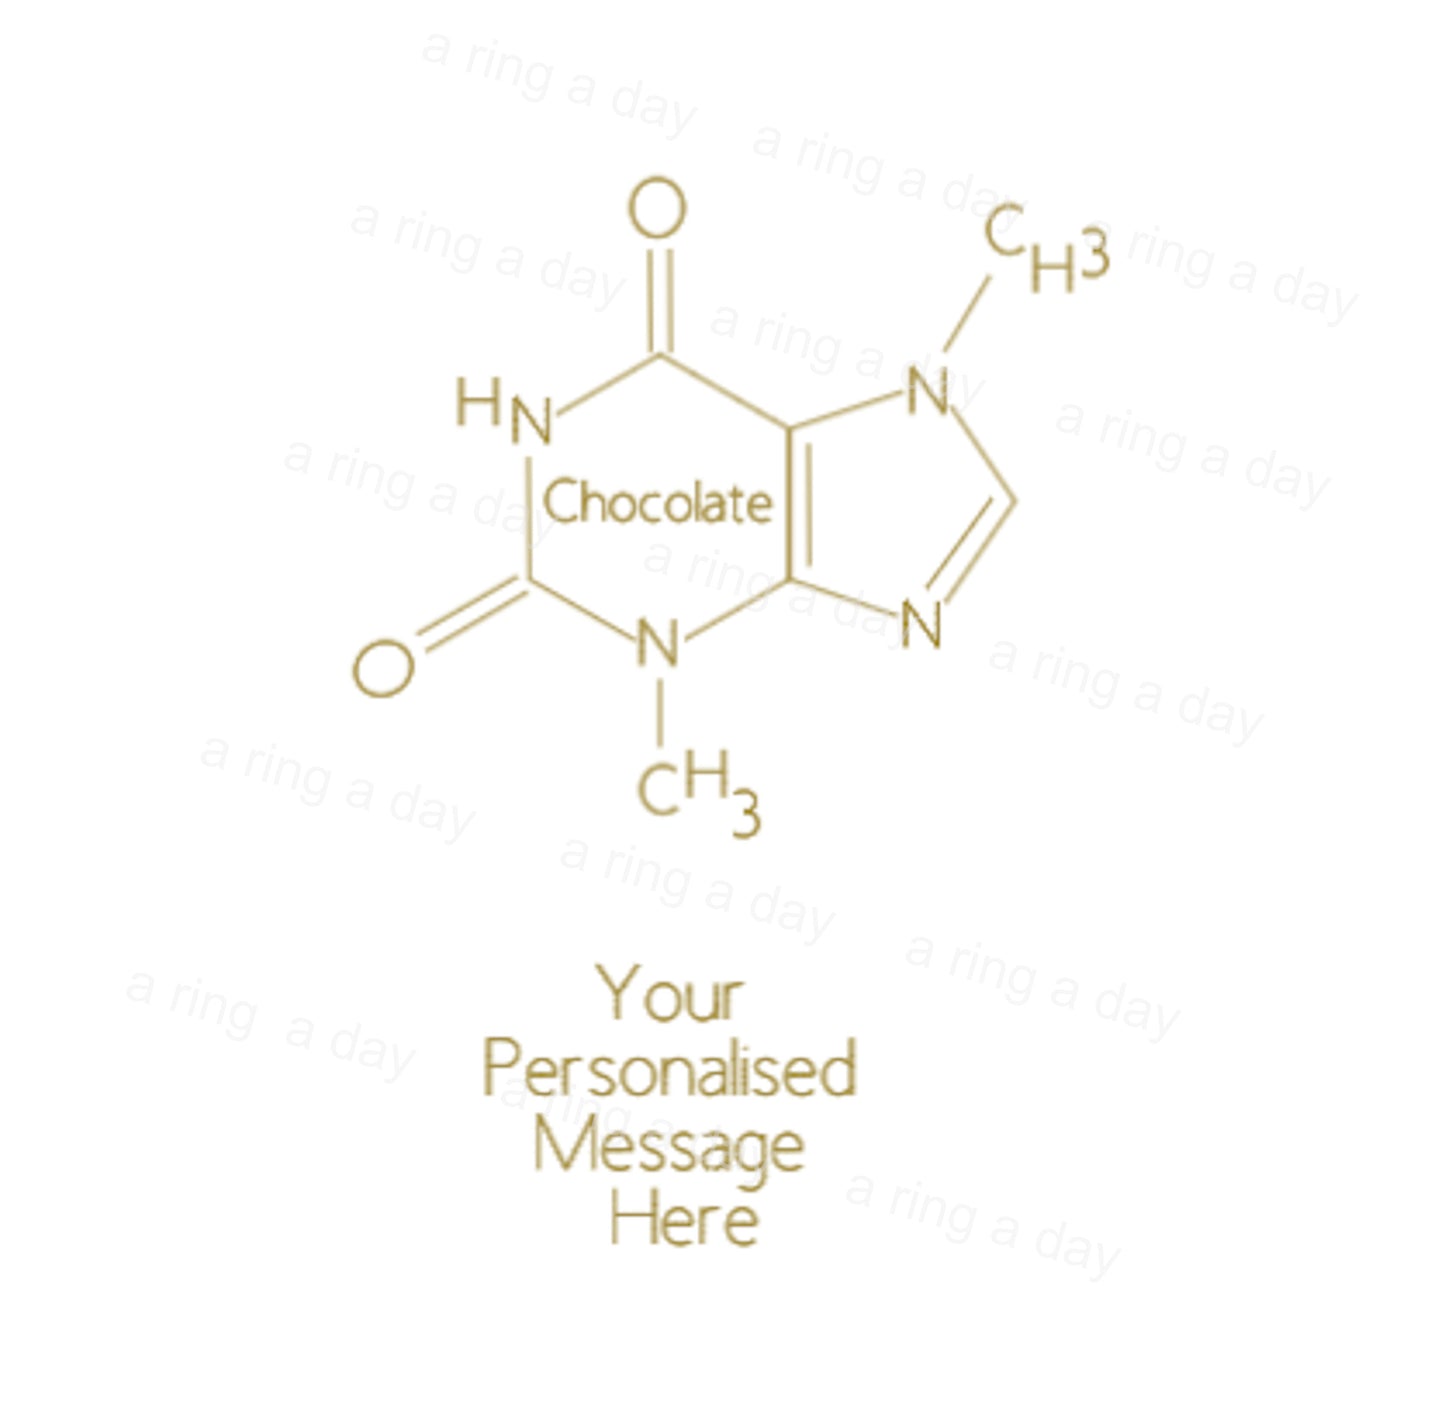 Personalised Chocolate Molecule Chemistry Thank You Teacher Gold Foil Card